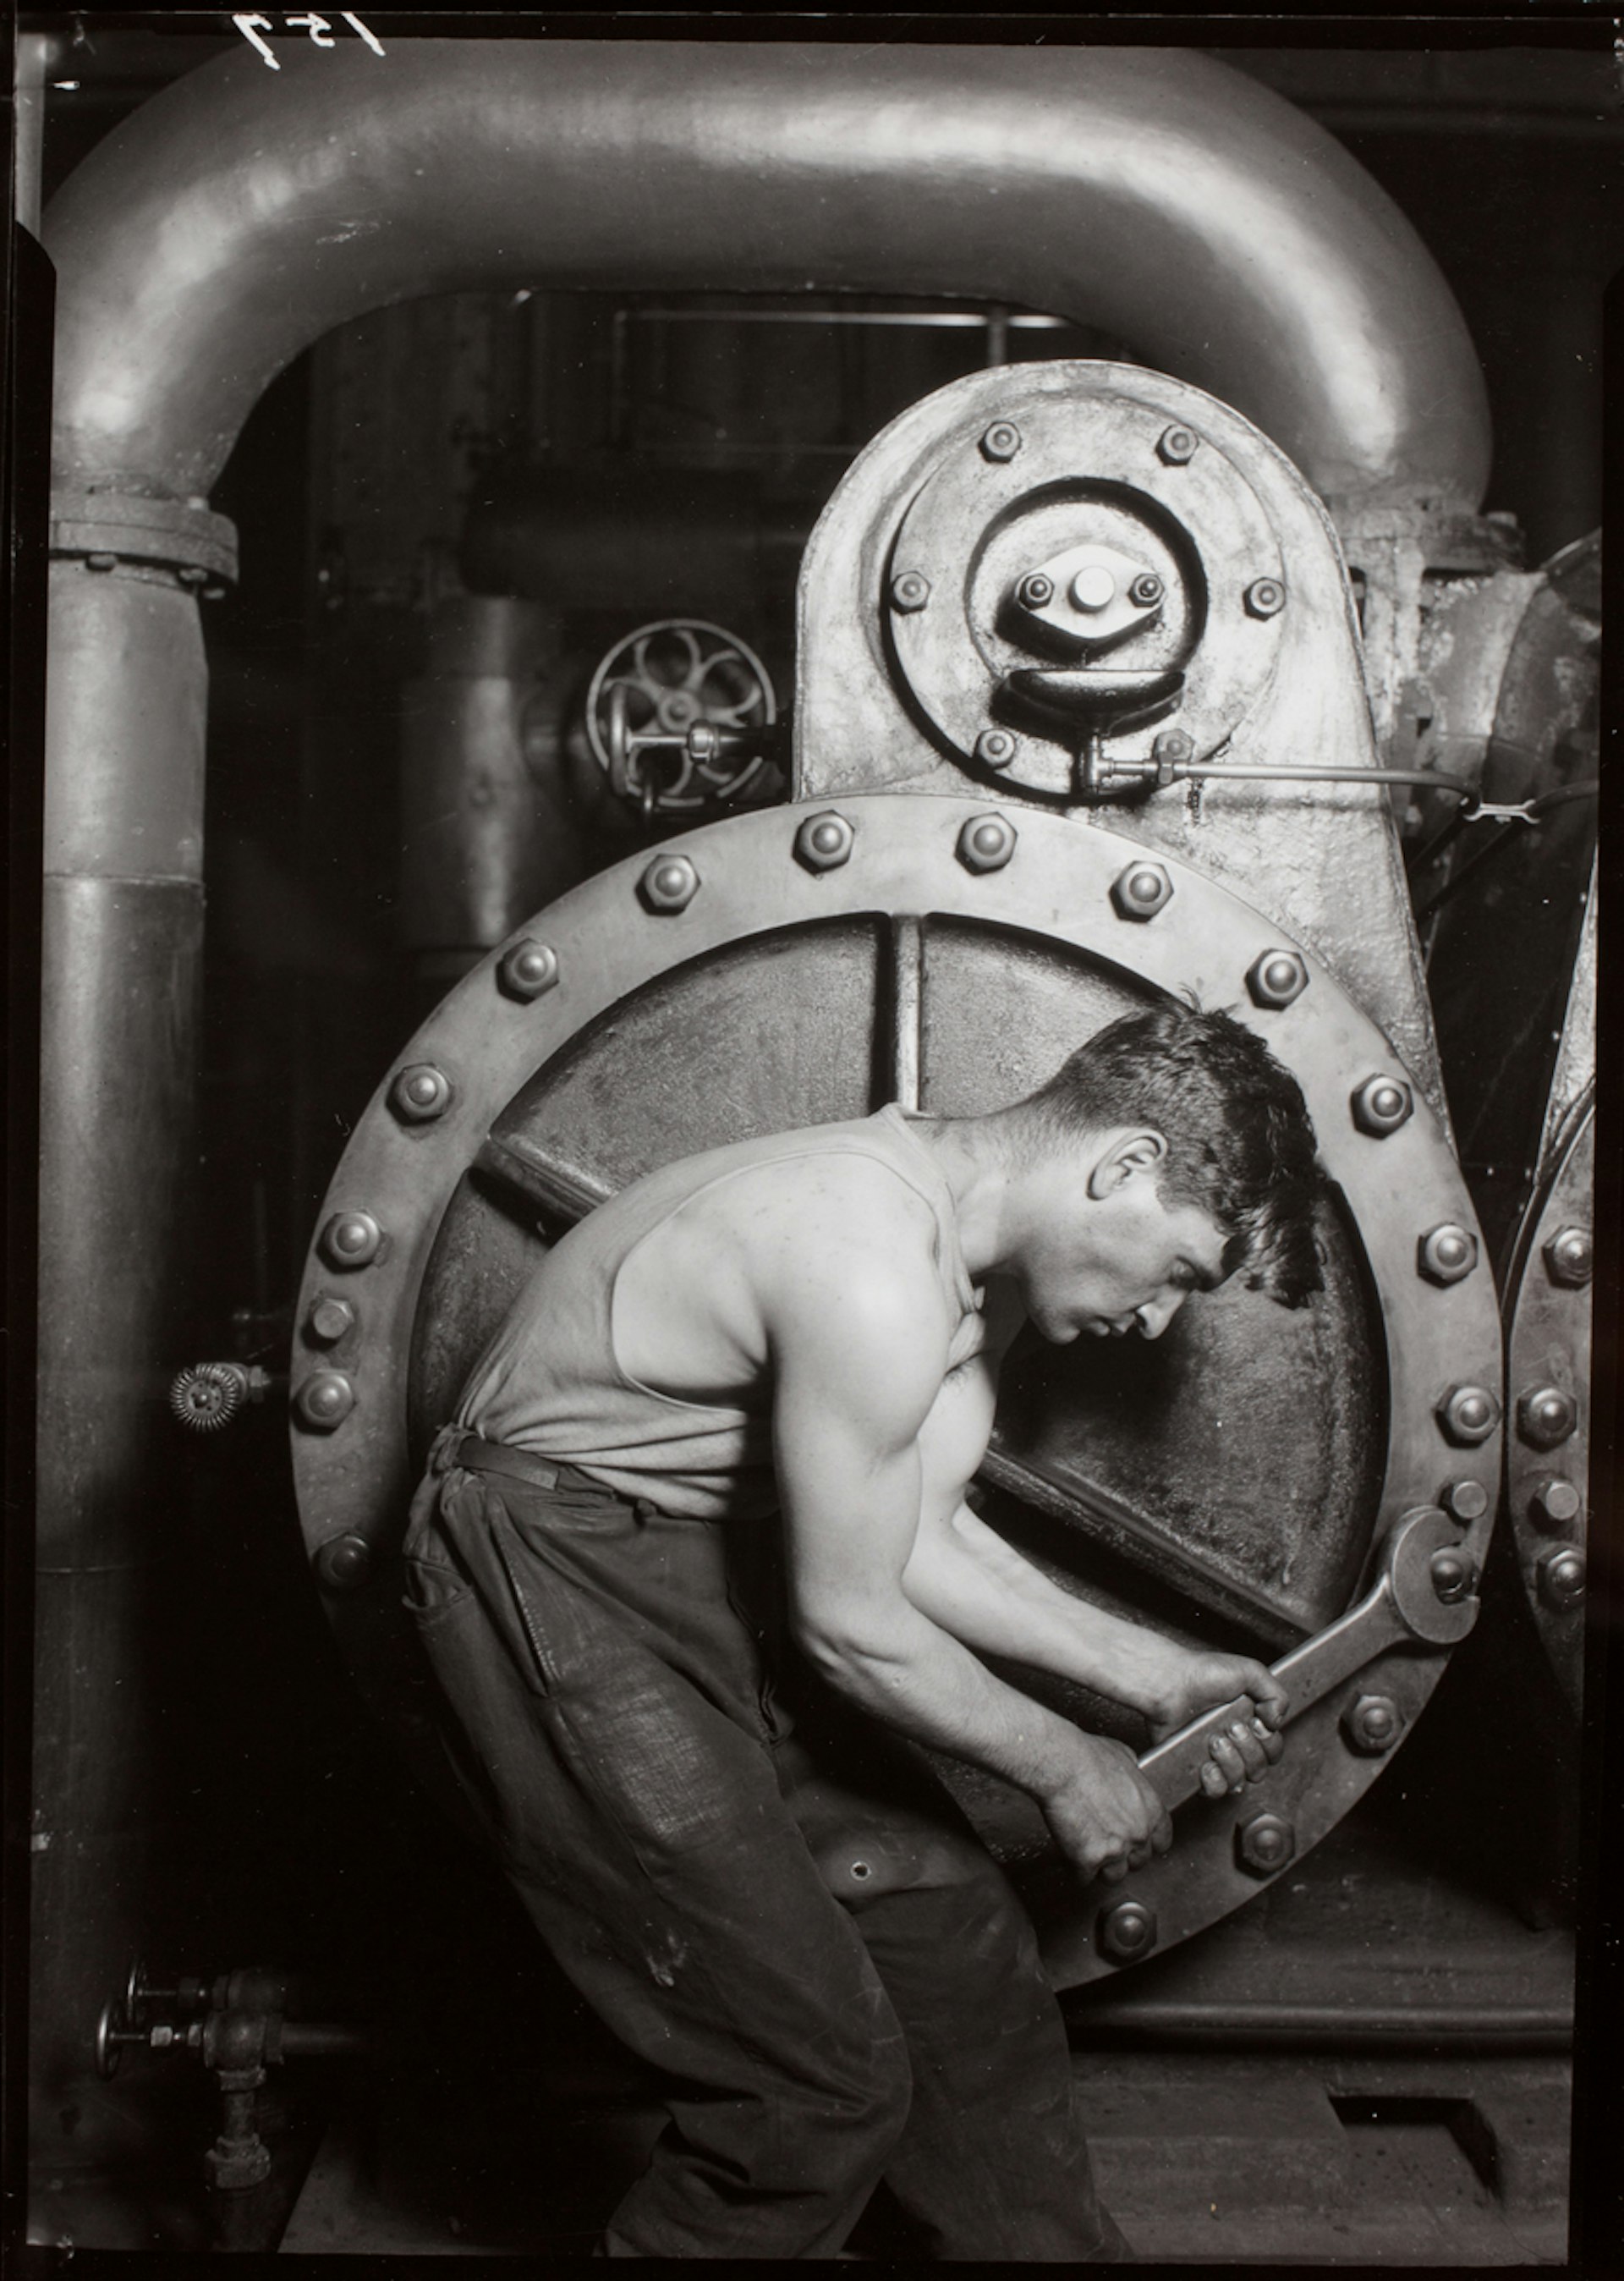 Powerhouse mechanic, 1920. Lewis W. Hine. Courtesy of George Eastman Museum, gift of the Photo League Lewis Hine Memorial Committee.